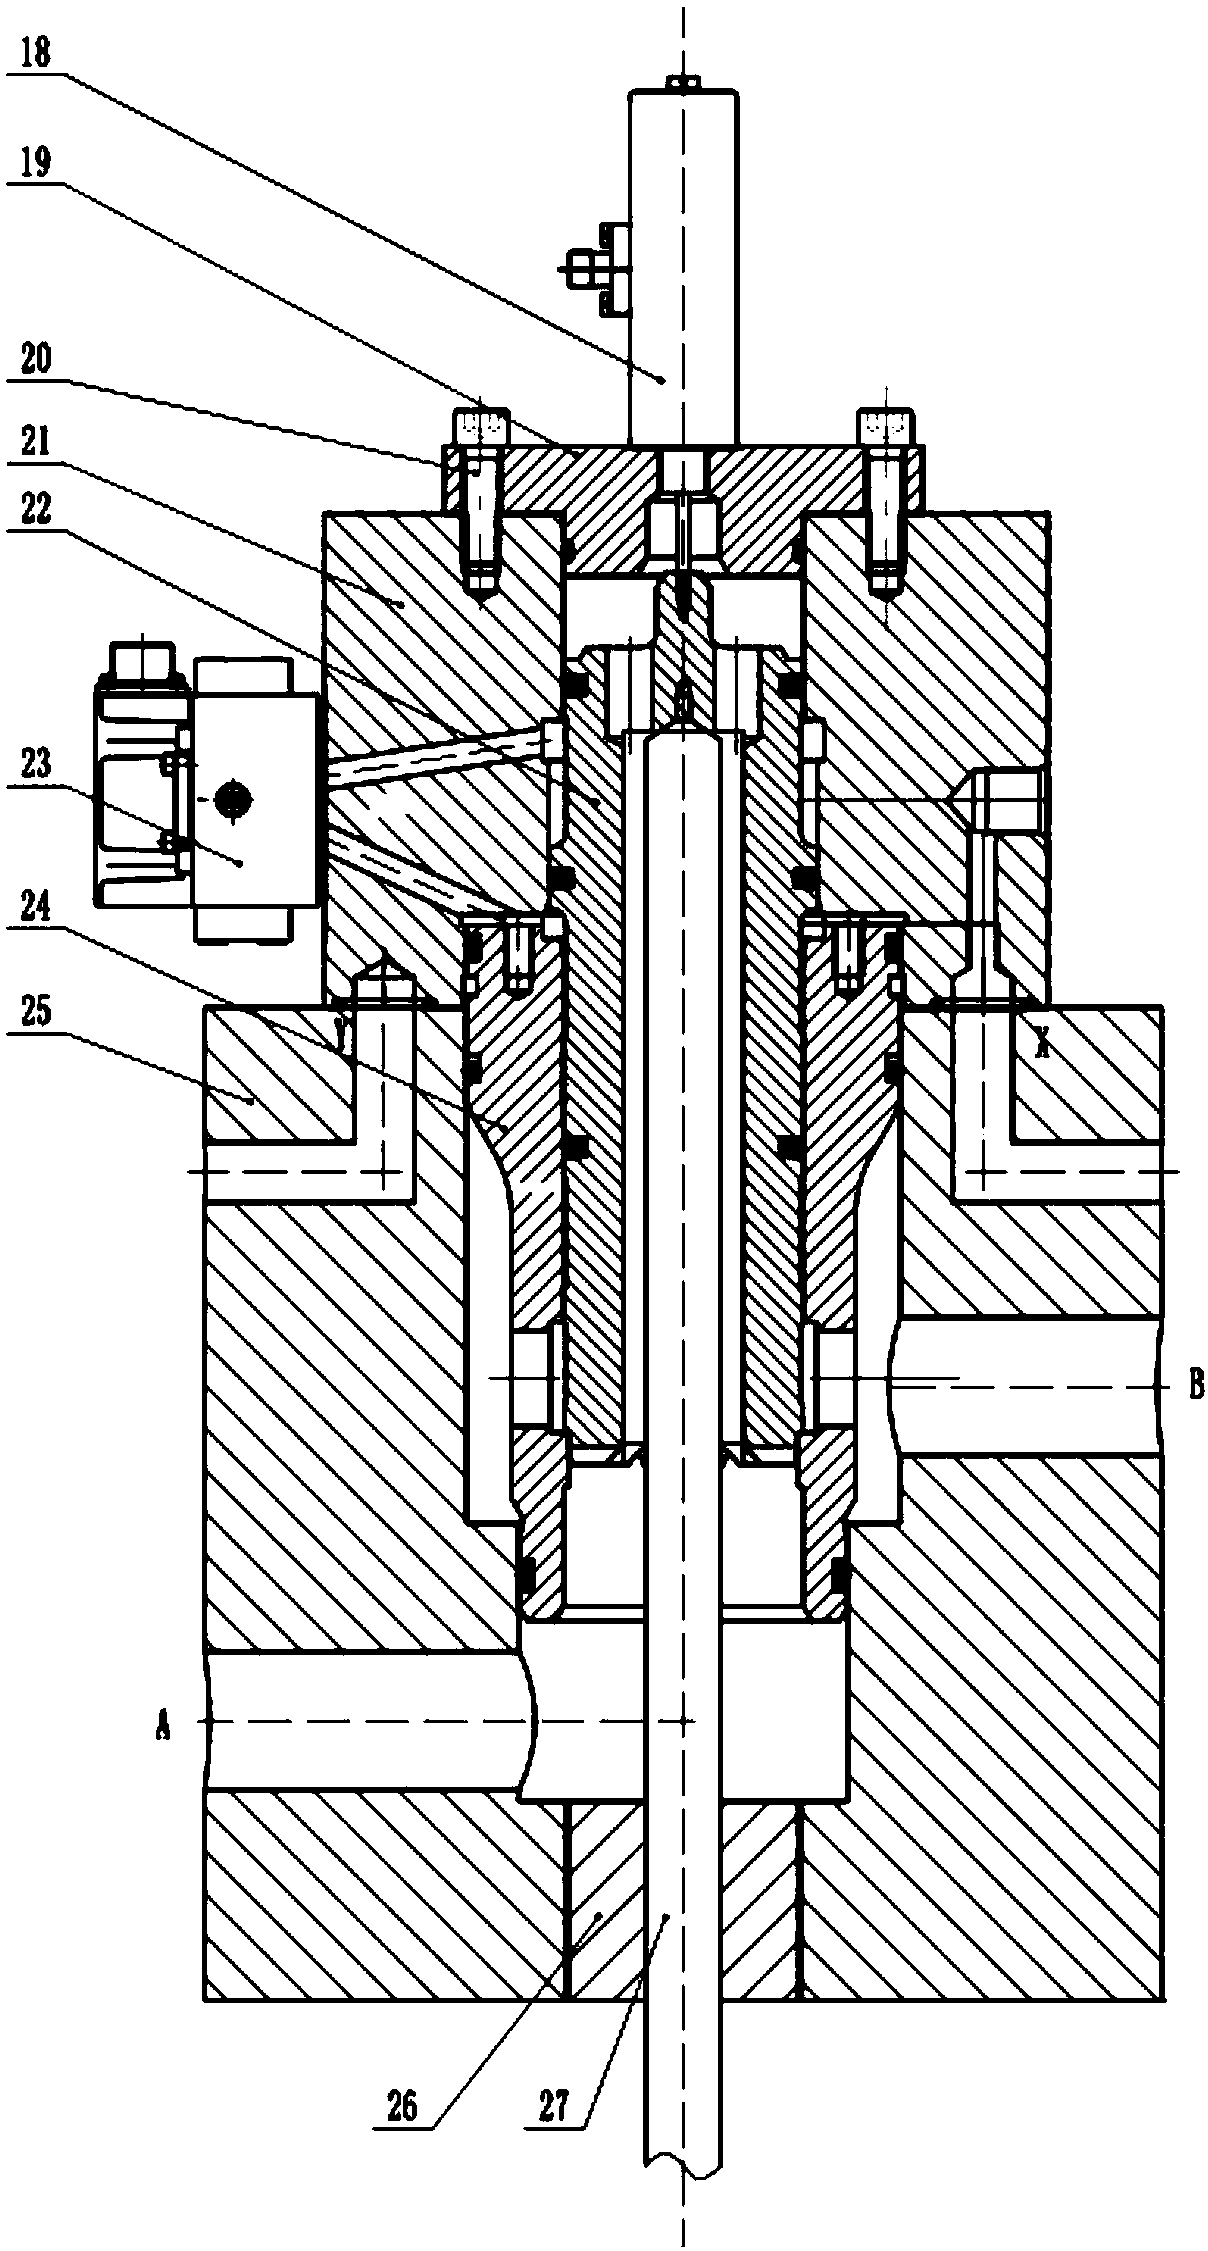 A dynamic performance test device for a large diameter ultra-high pressure electro-hydraulic proportional cartridge valve